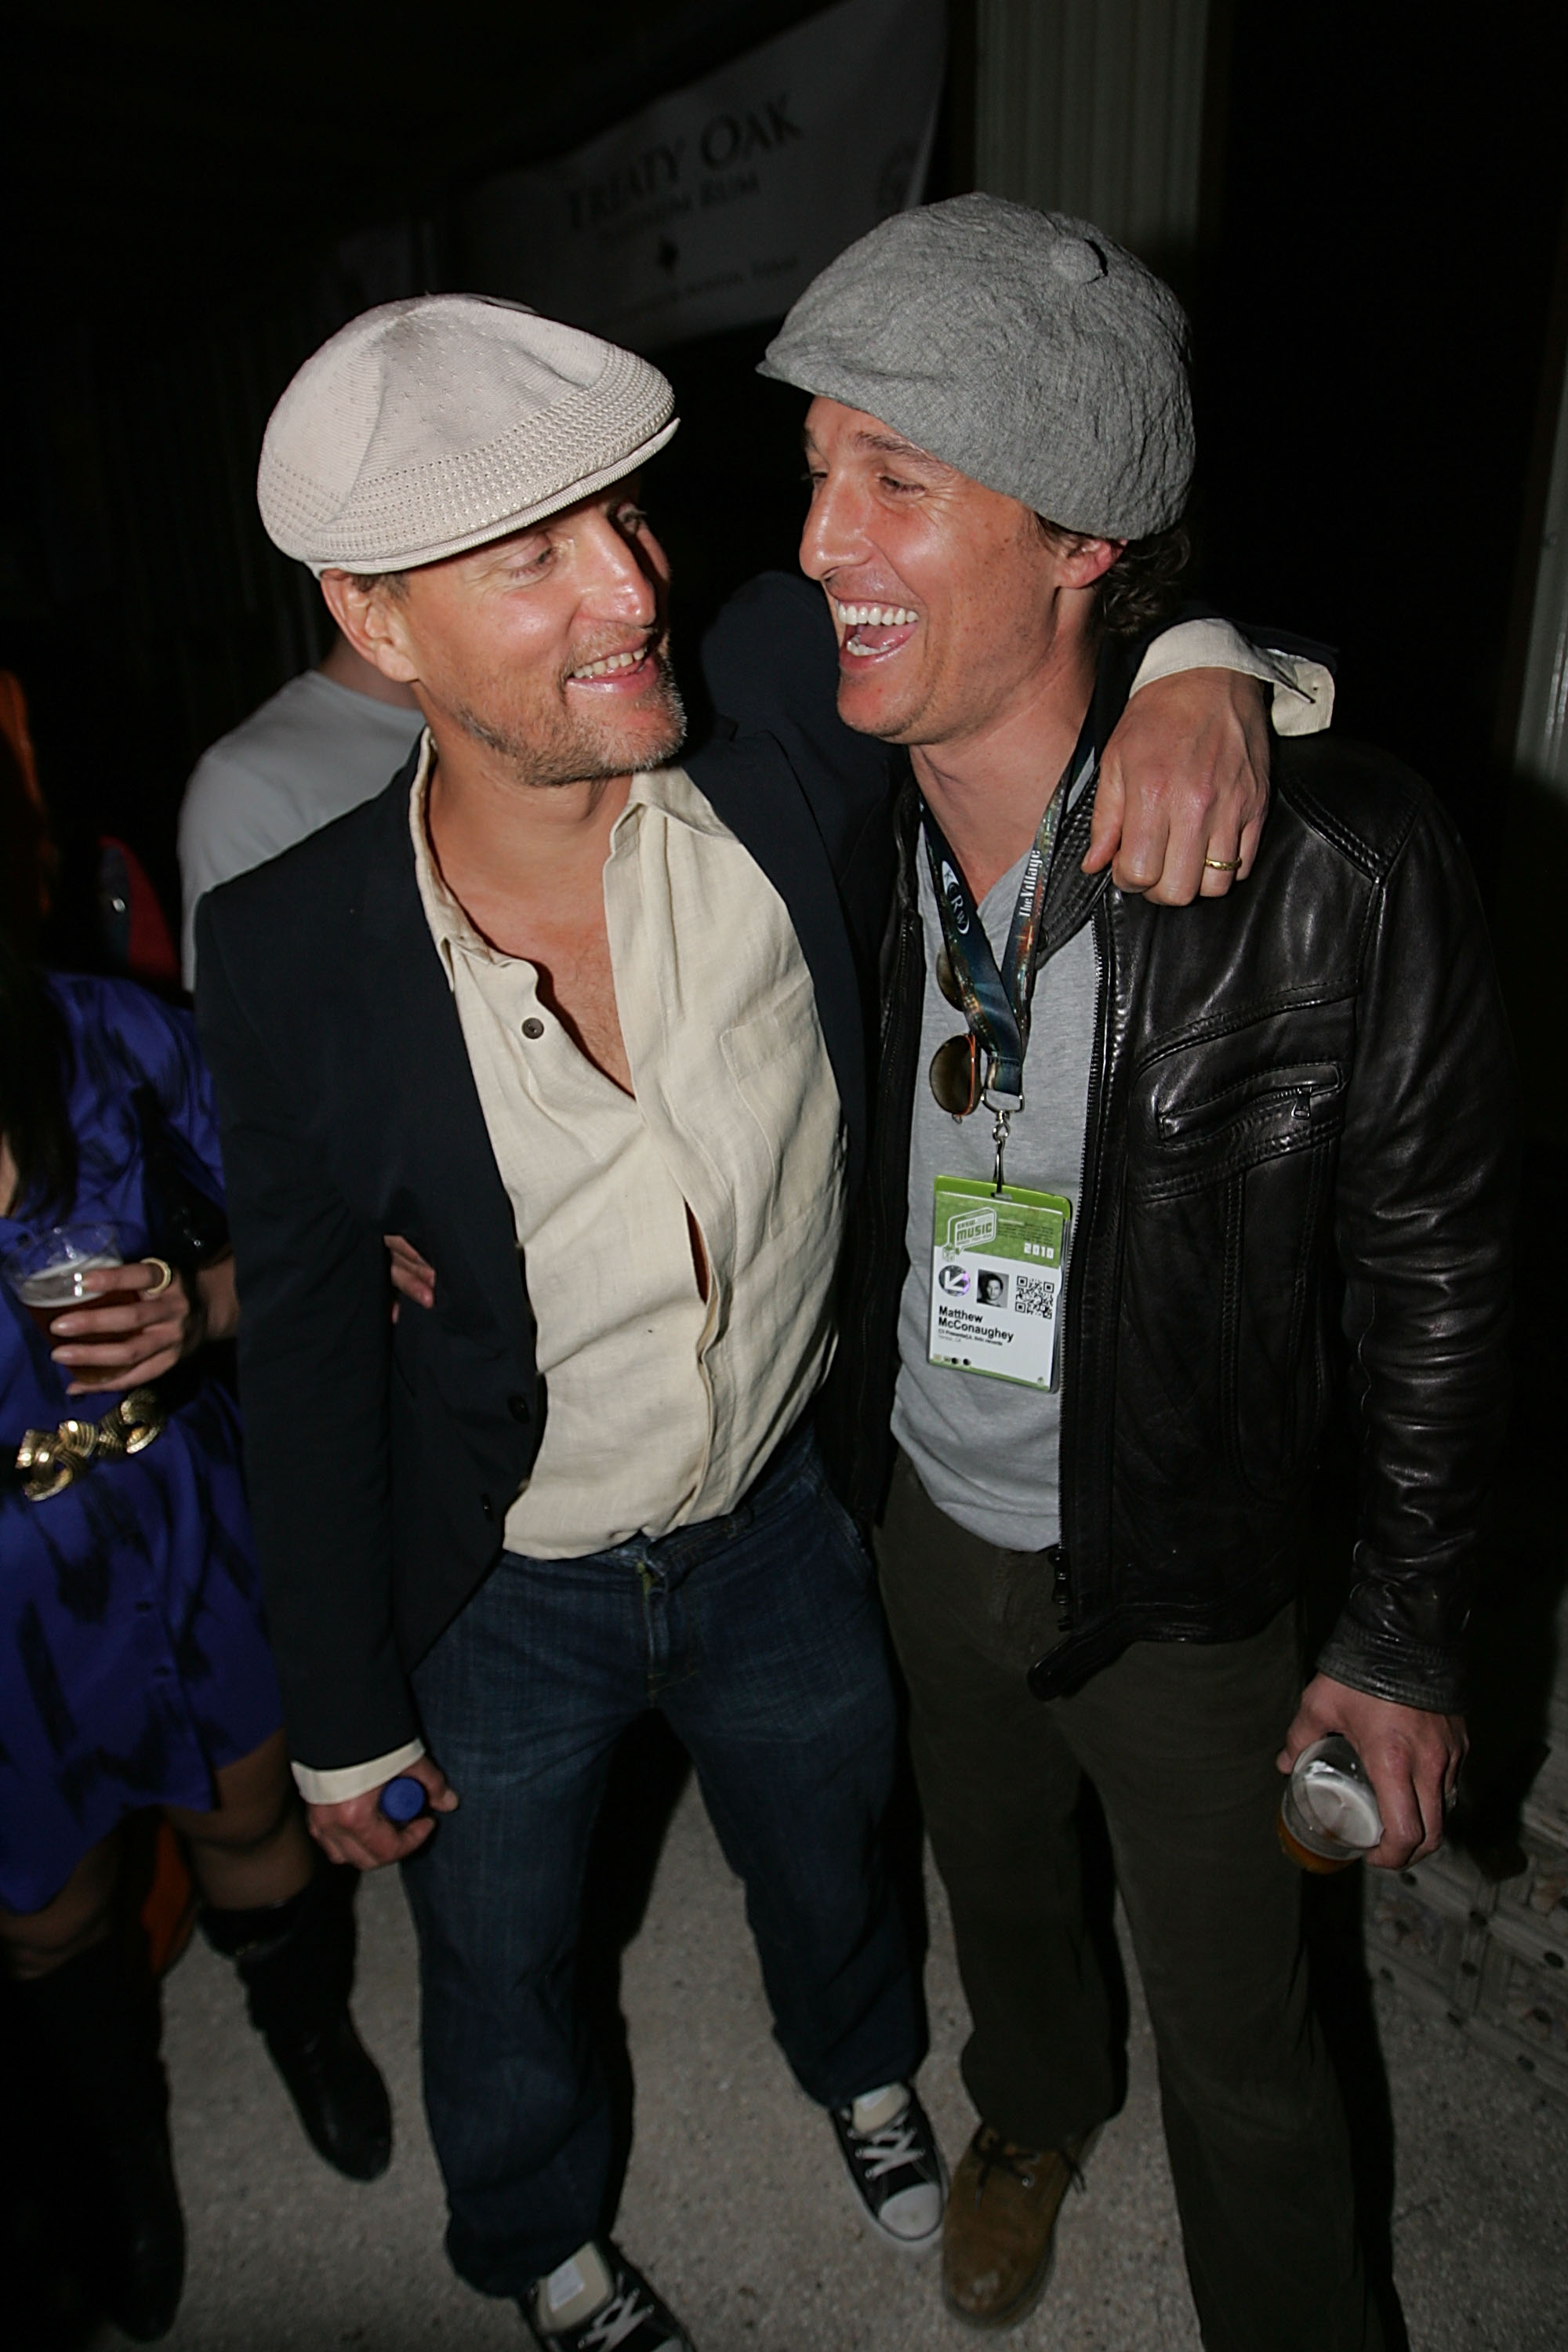 Woody Harrelson and Matthew McConaughey enjoying the music of John Popper during the Bliss Lounge Party, a charity event benefiting H.O.P.E., held at Big Red Sun in Austin, Texas, on March 19, 2010 | Source: Getty Images